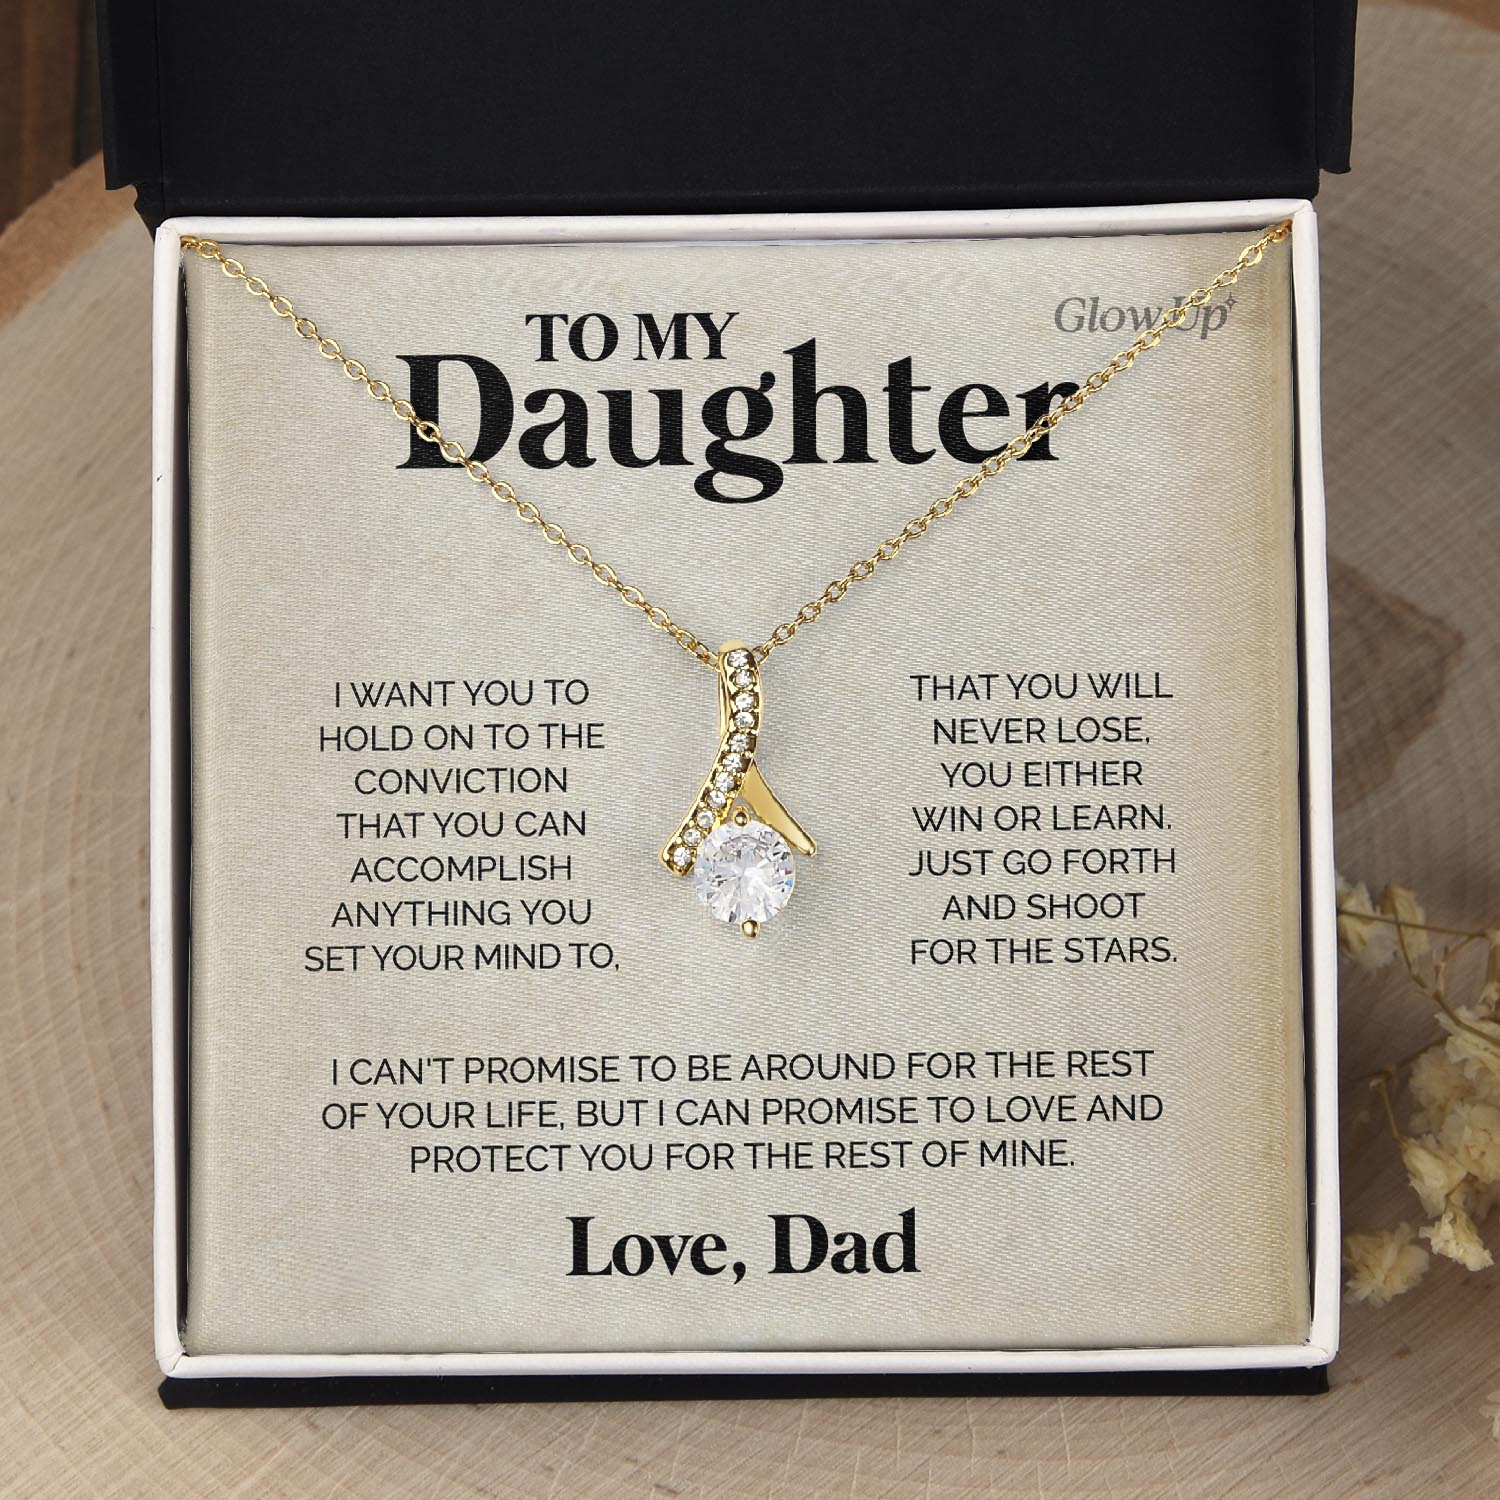 ShineOn Fulfillment Jewelry 18K Yellow Gold Finish / Two Toned Box To my Daughter - Just go forth - Ribbon Necklace